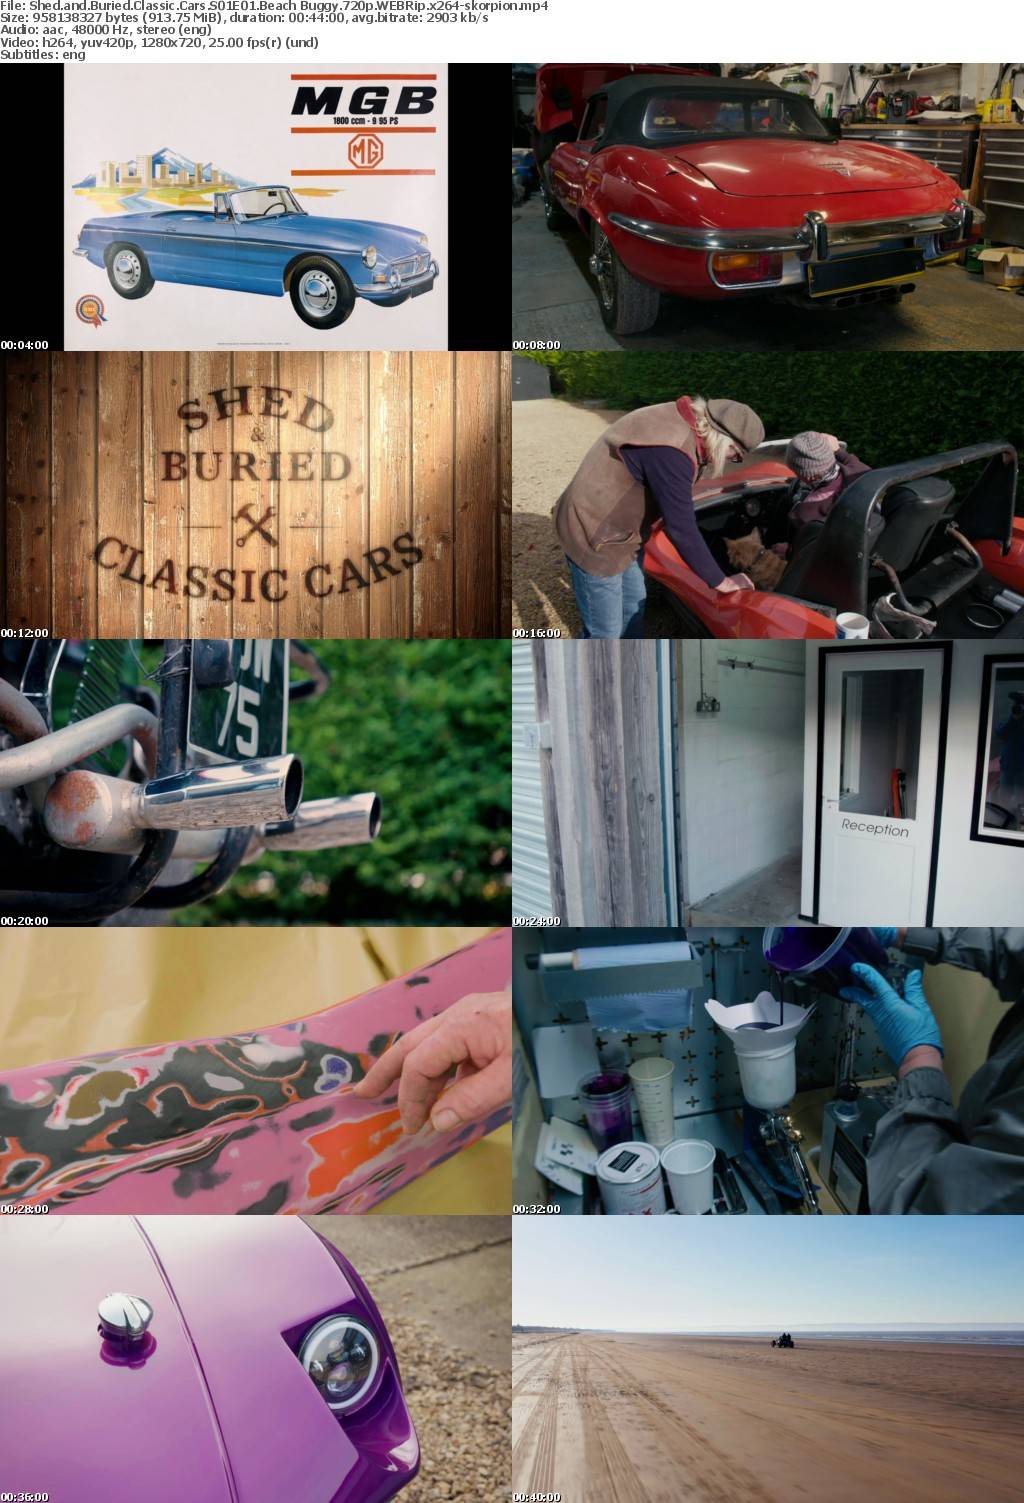 Shed and Buried Classic Cars S01E01 Beach Buggy 720p WEBRip x264-skorpion mp4